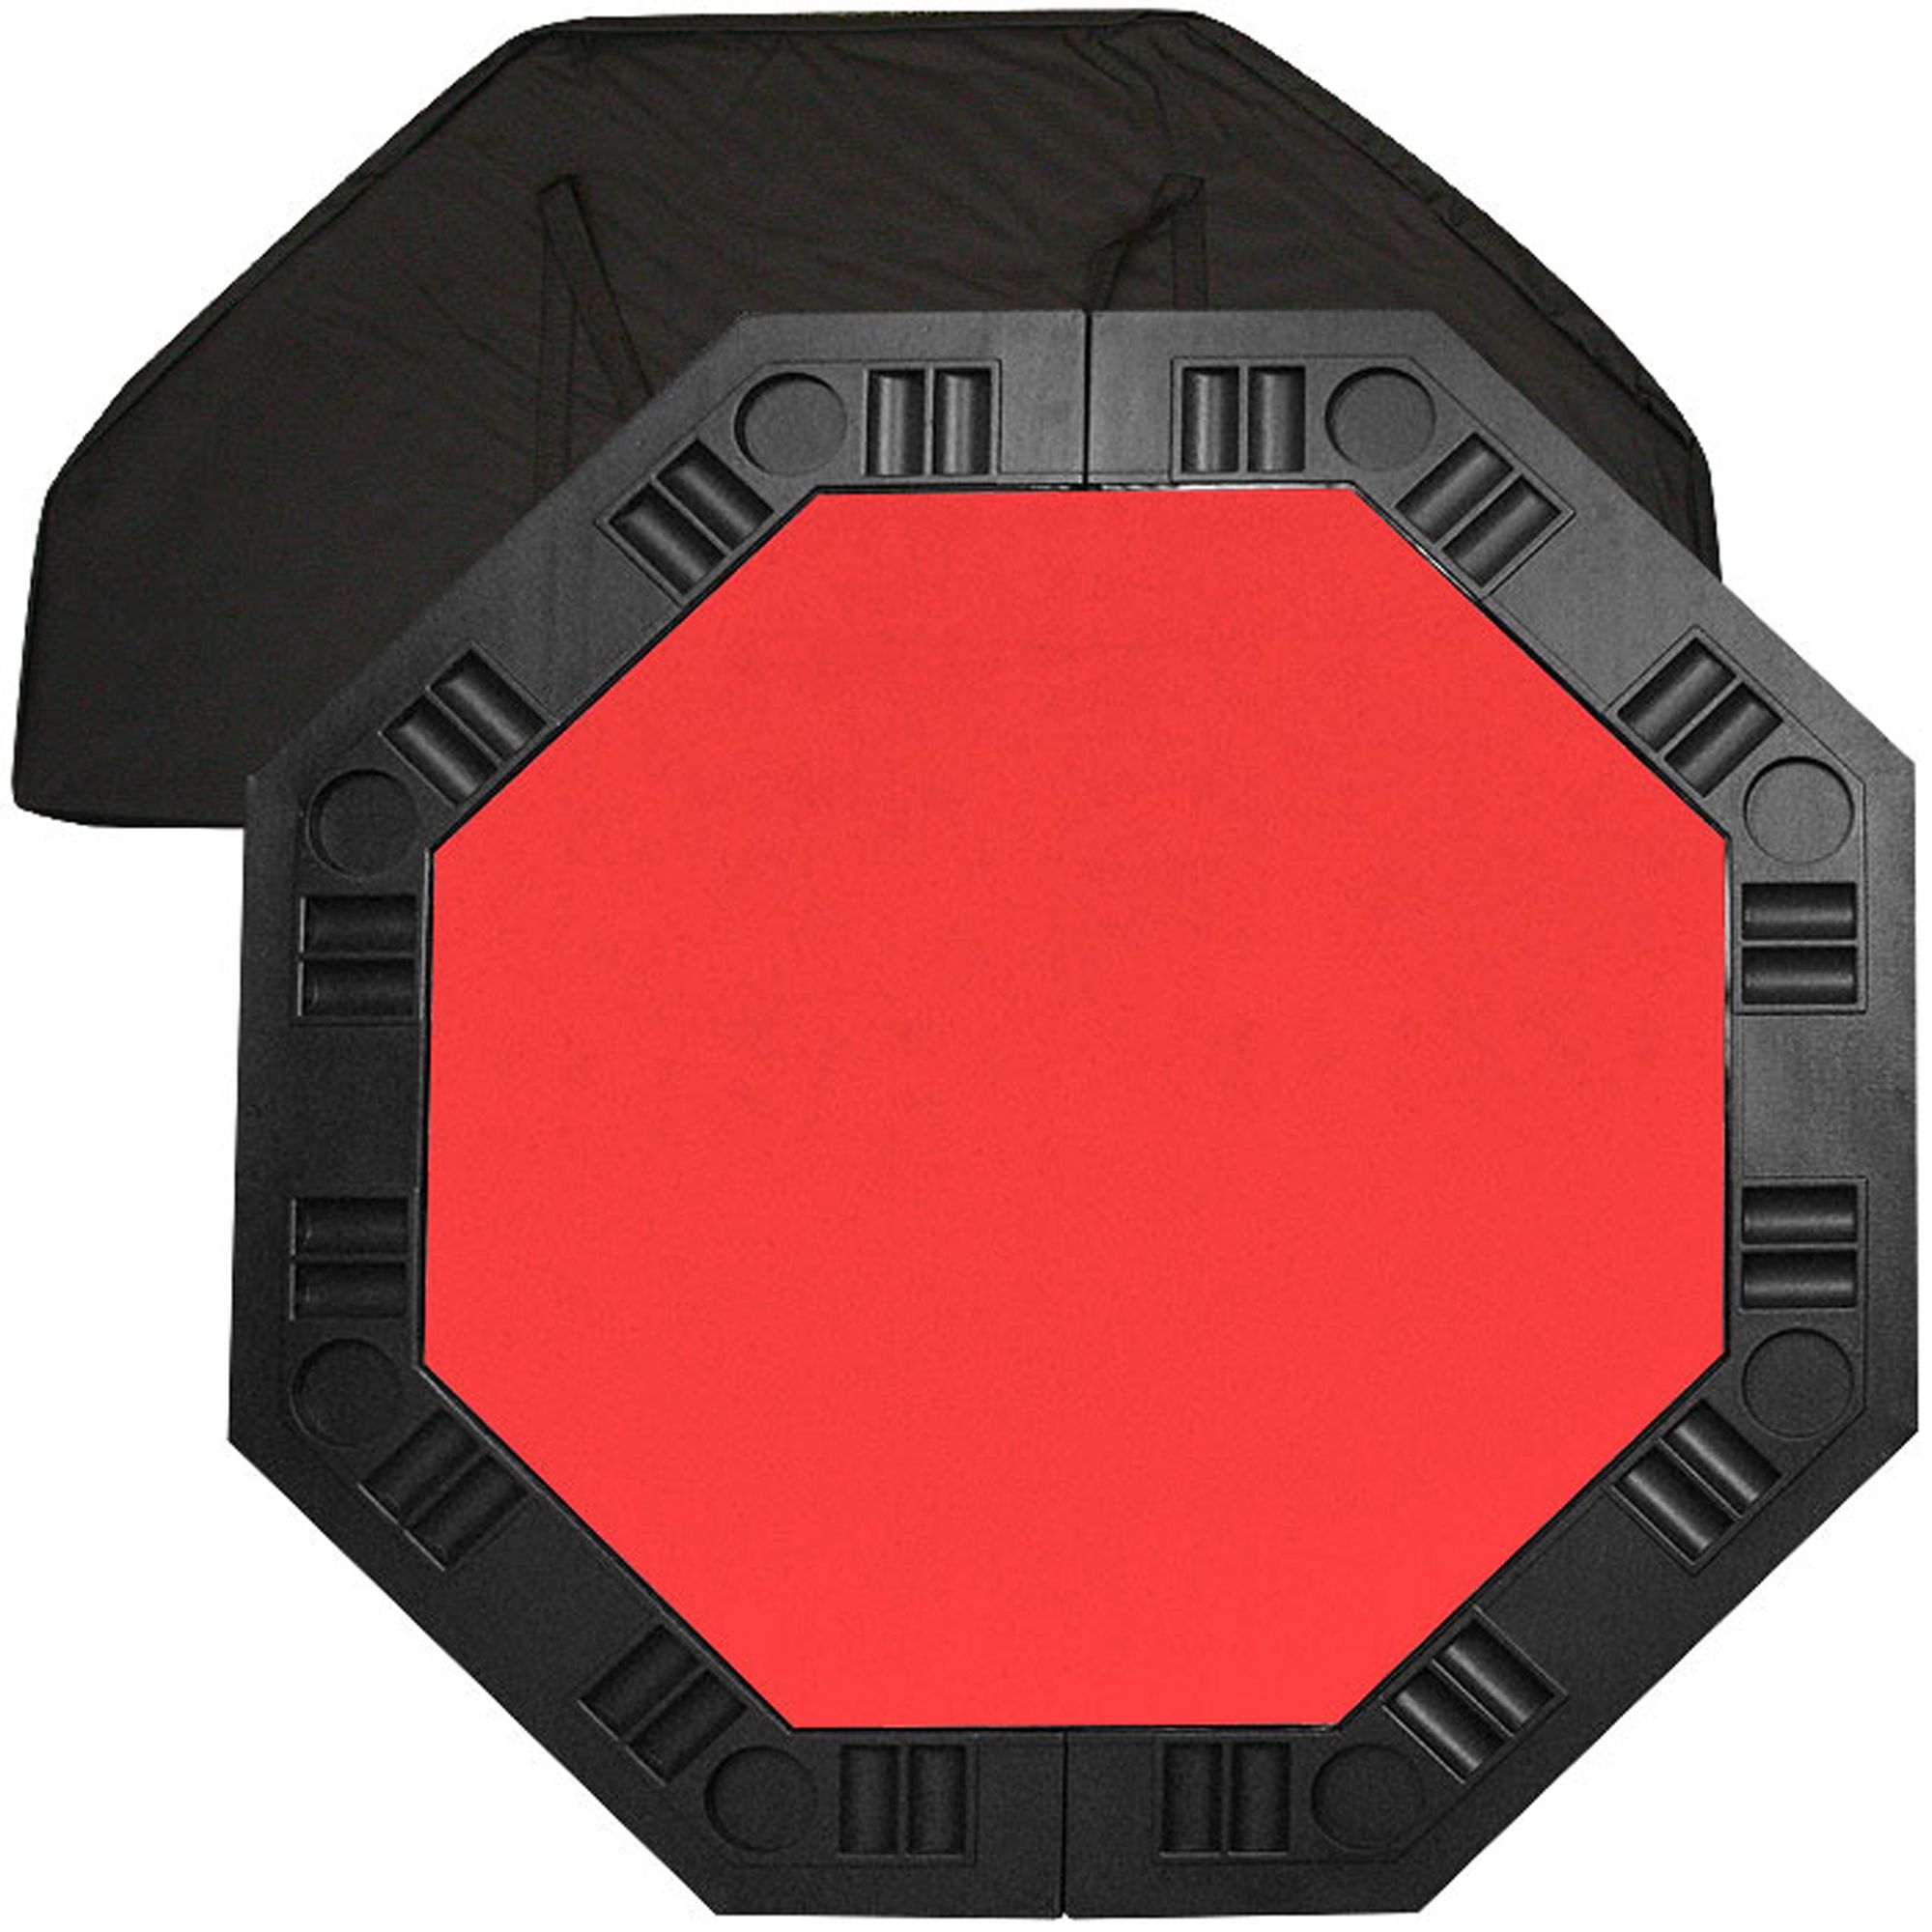 Trademark 8 Player Octagonal Table top - Red - 48 inch